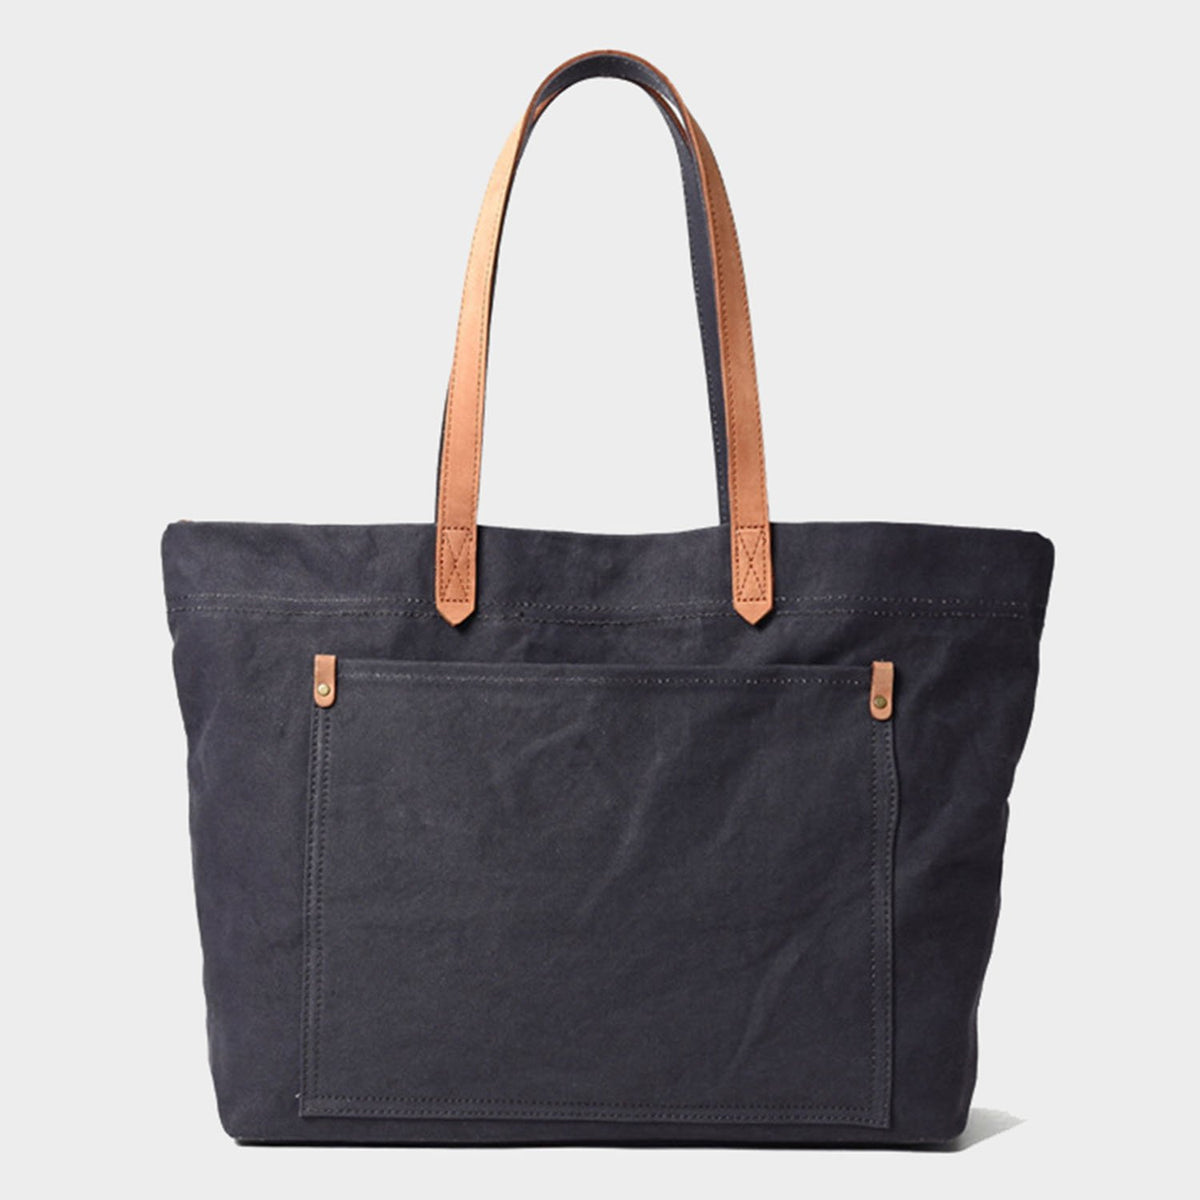 Canvas Tote Shopping Bag (L) - worthtryit.com